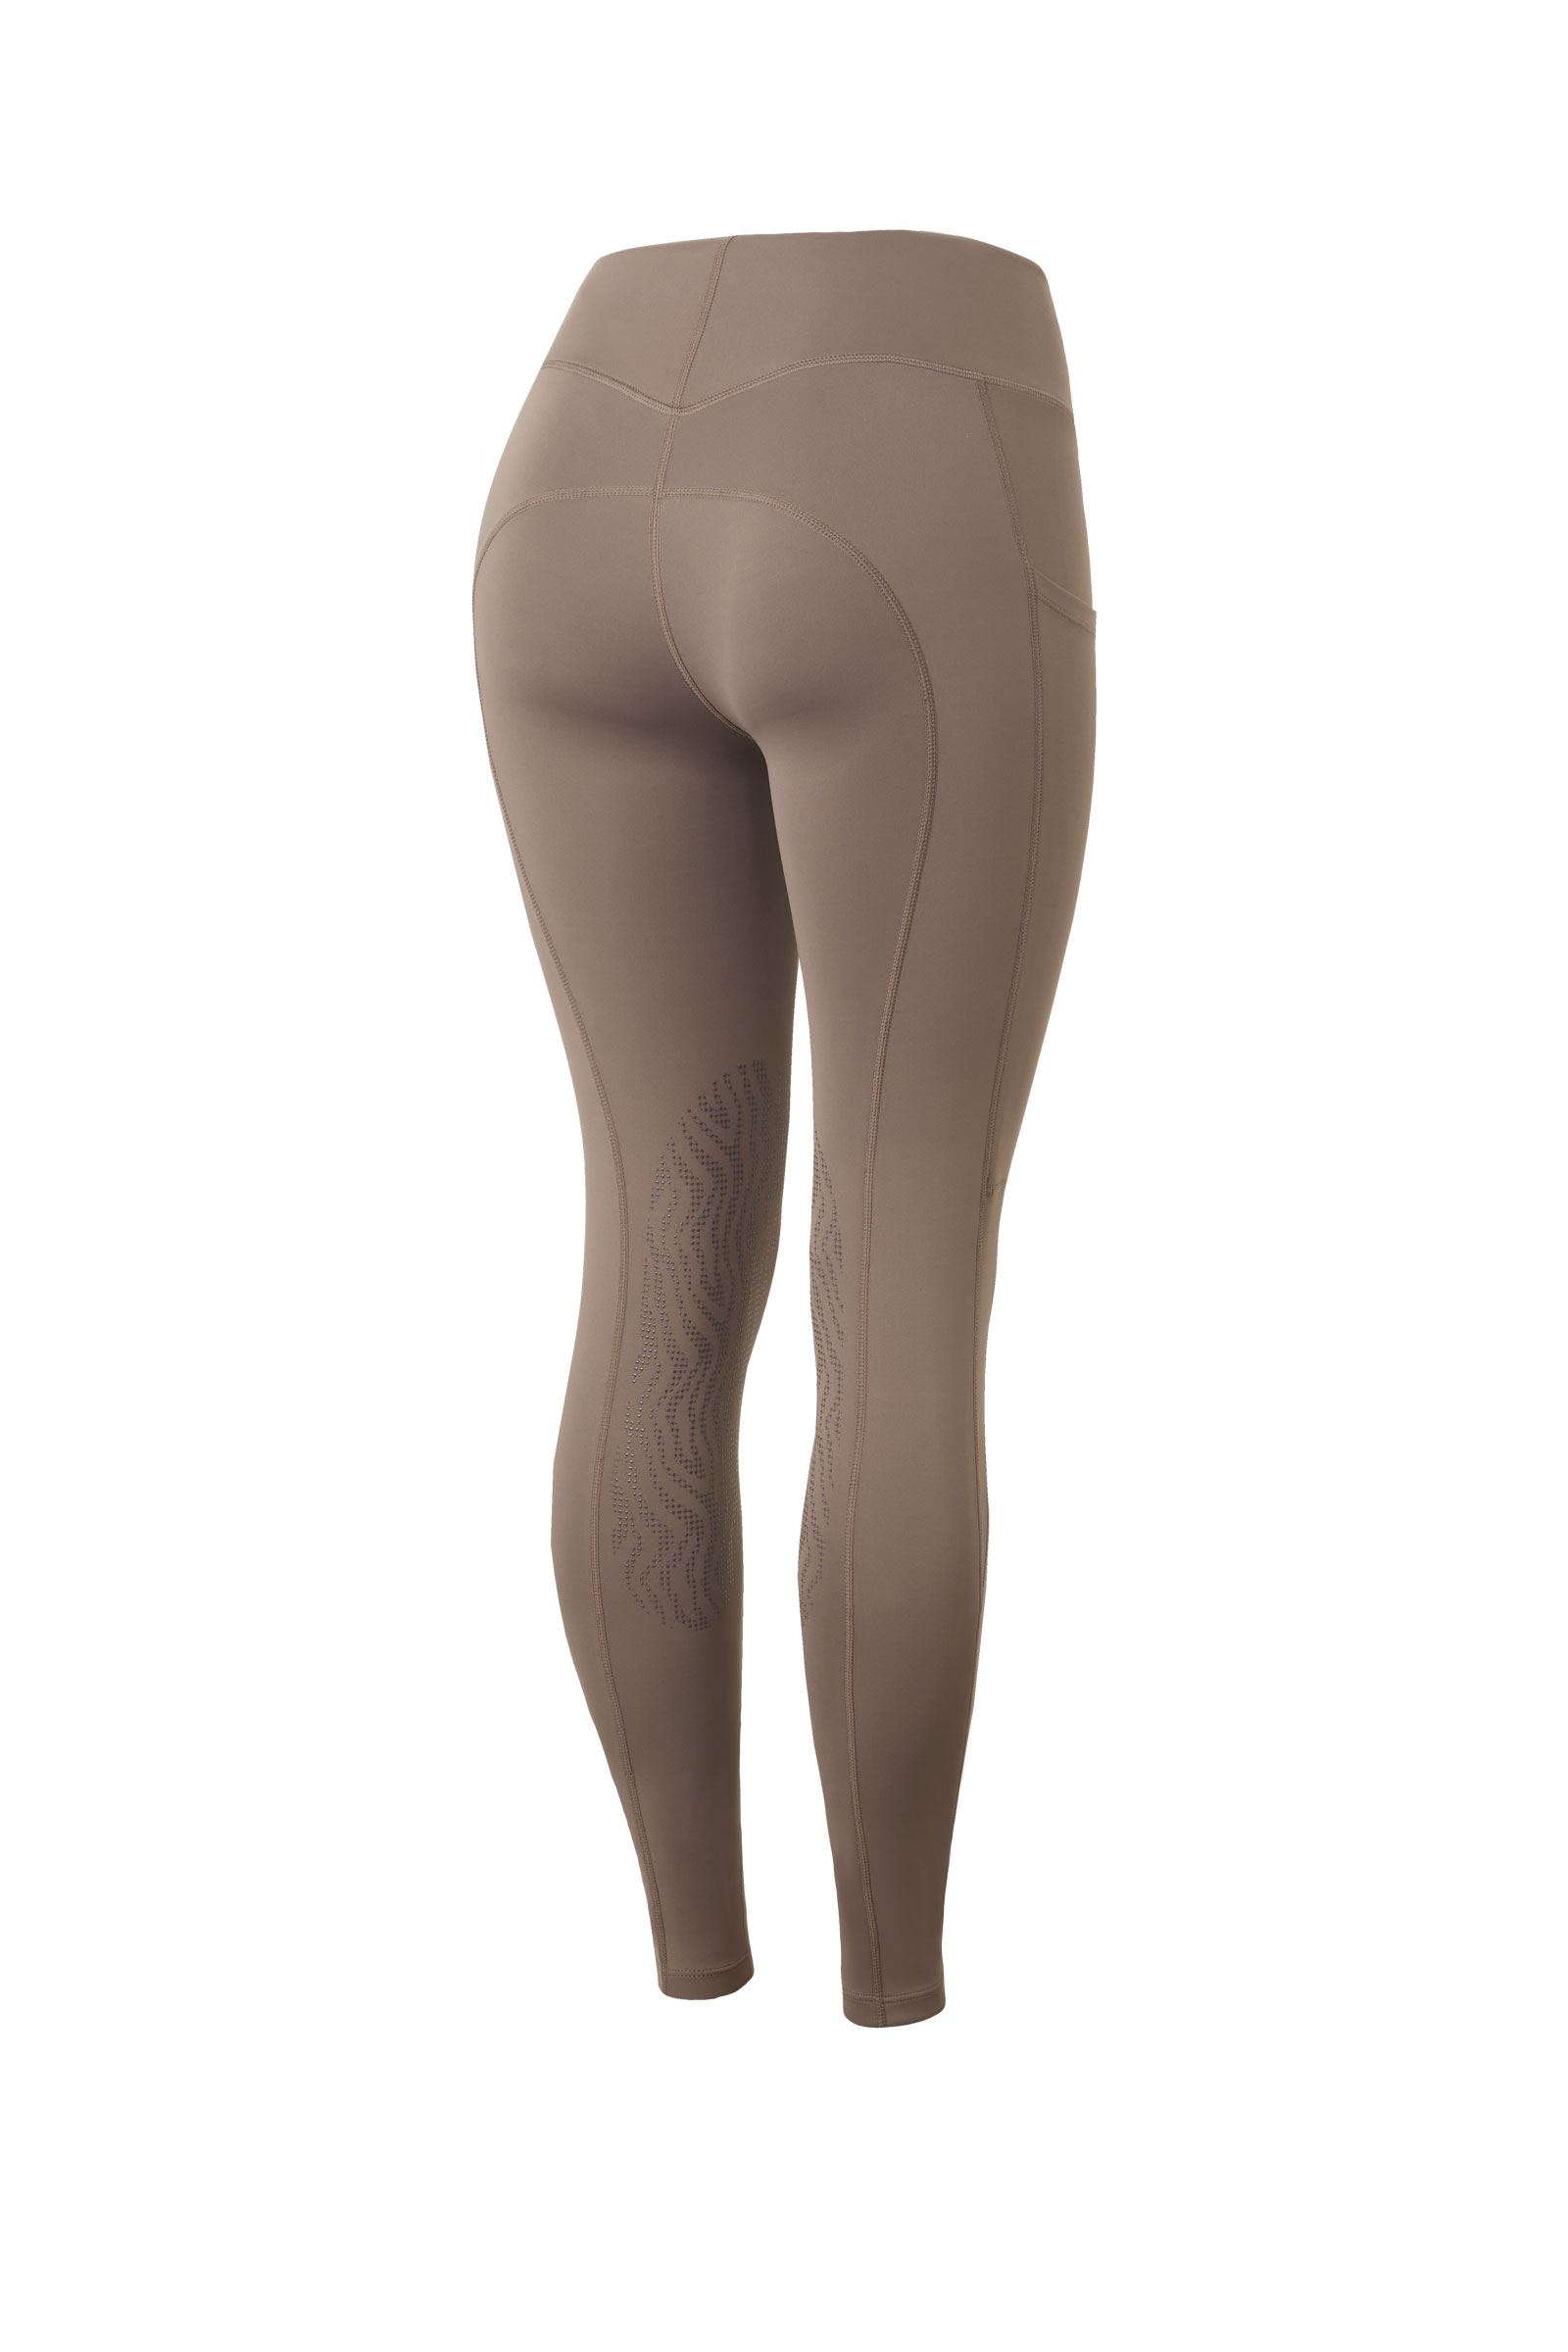 Buy affordable Women's Knee Patch Riding Tights Test now